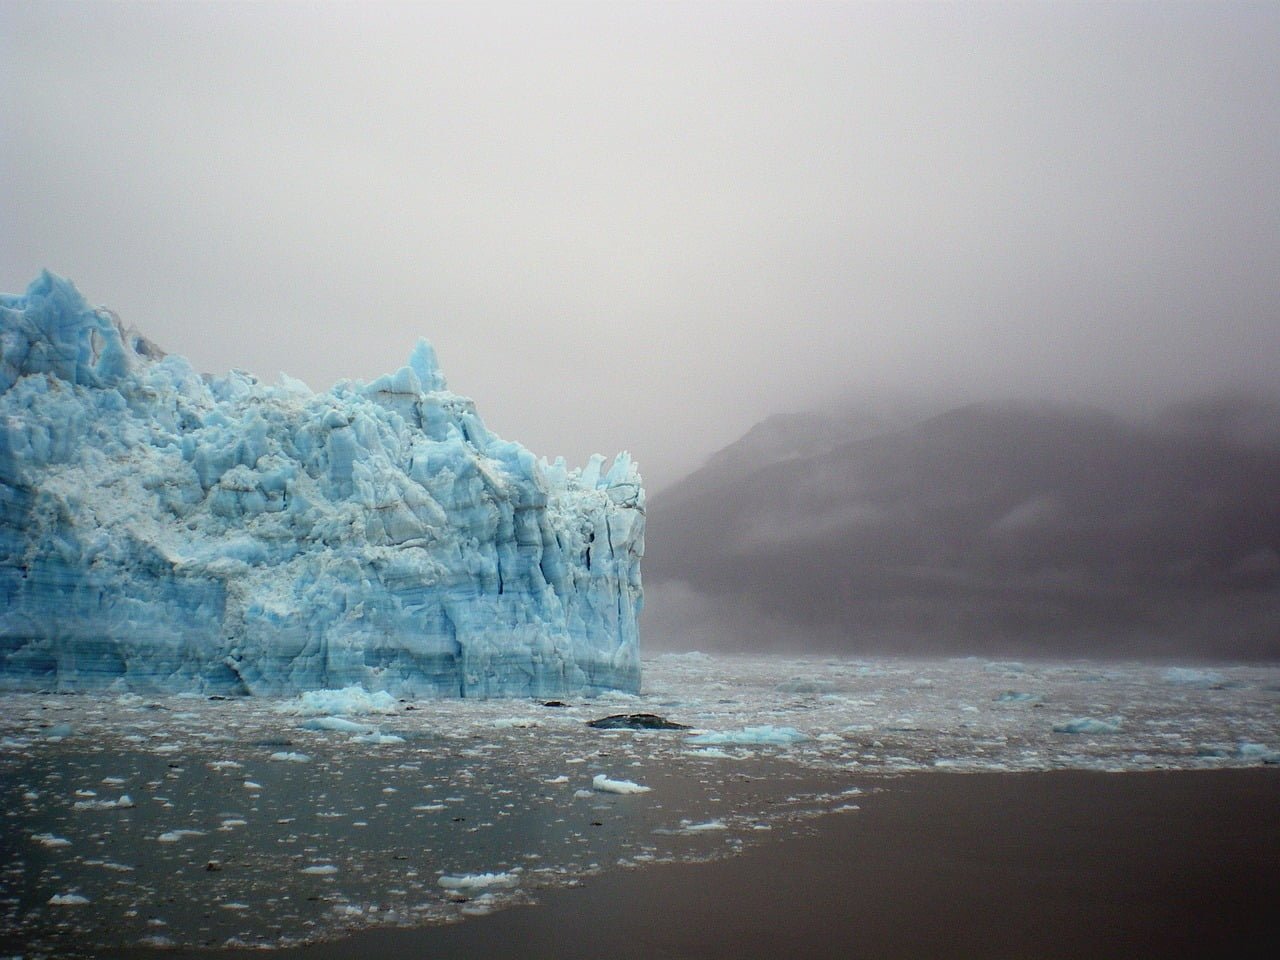 A towering blue glacier rising from a dark sea with scattered ice under a heavy, foggy sky, with obscured mountains in the background.